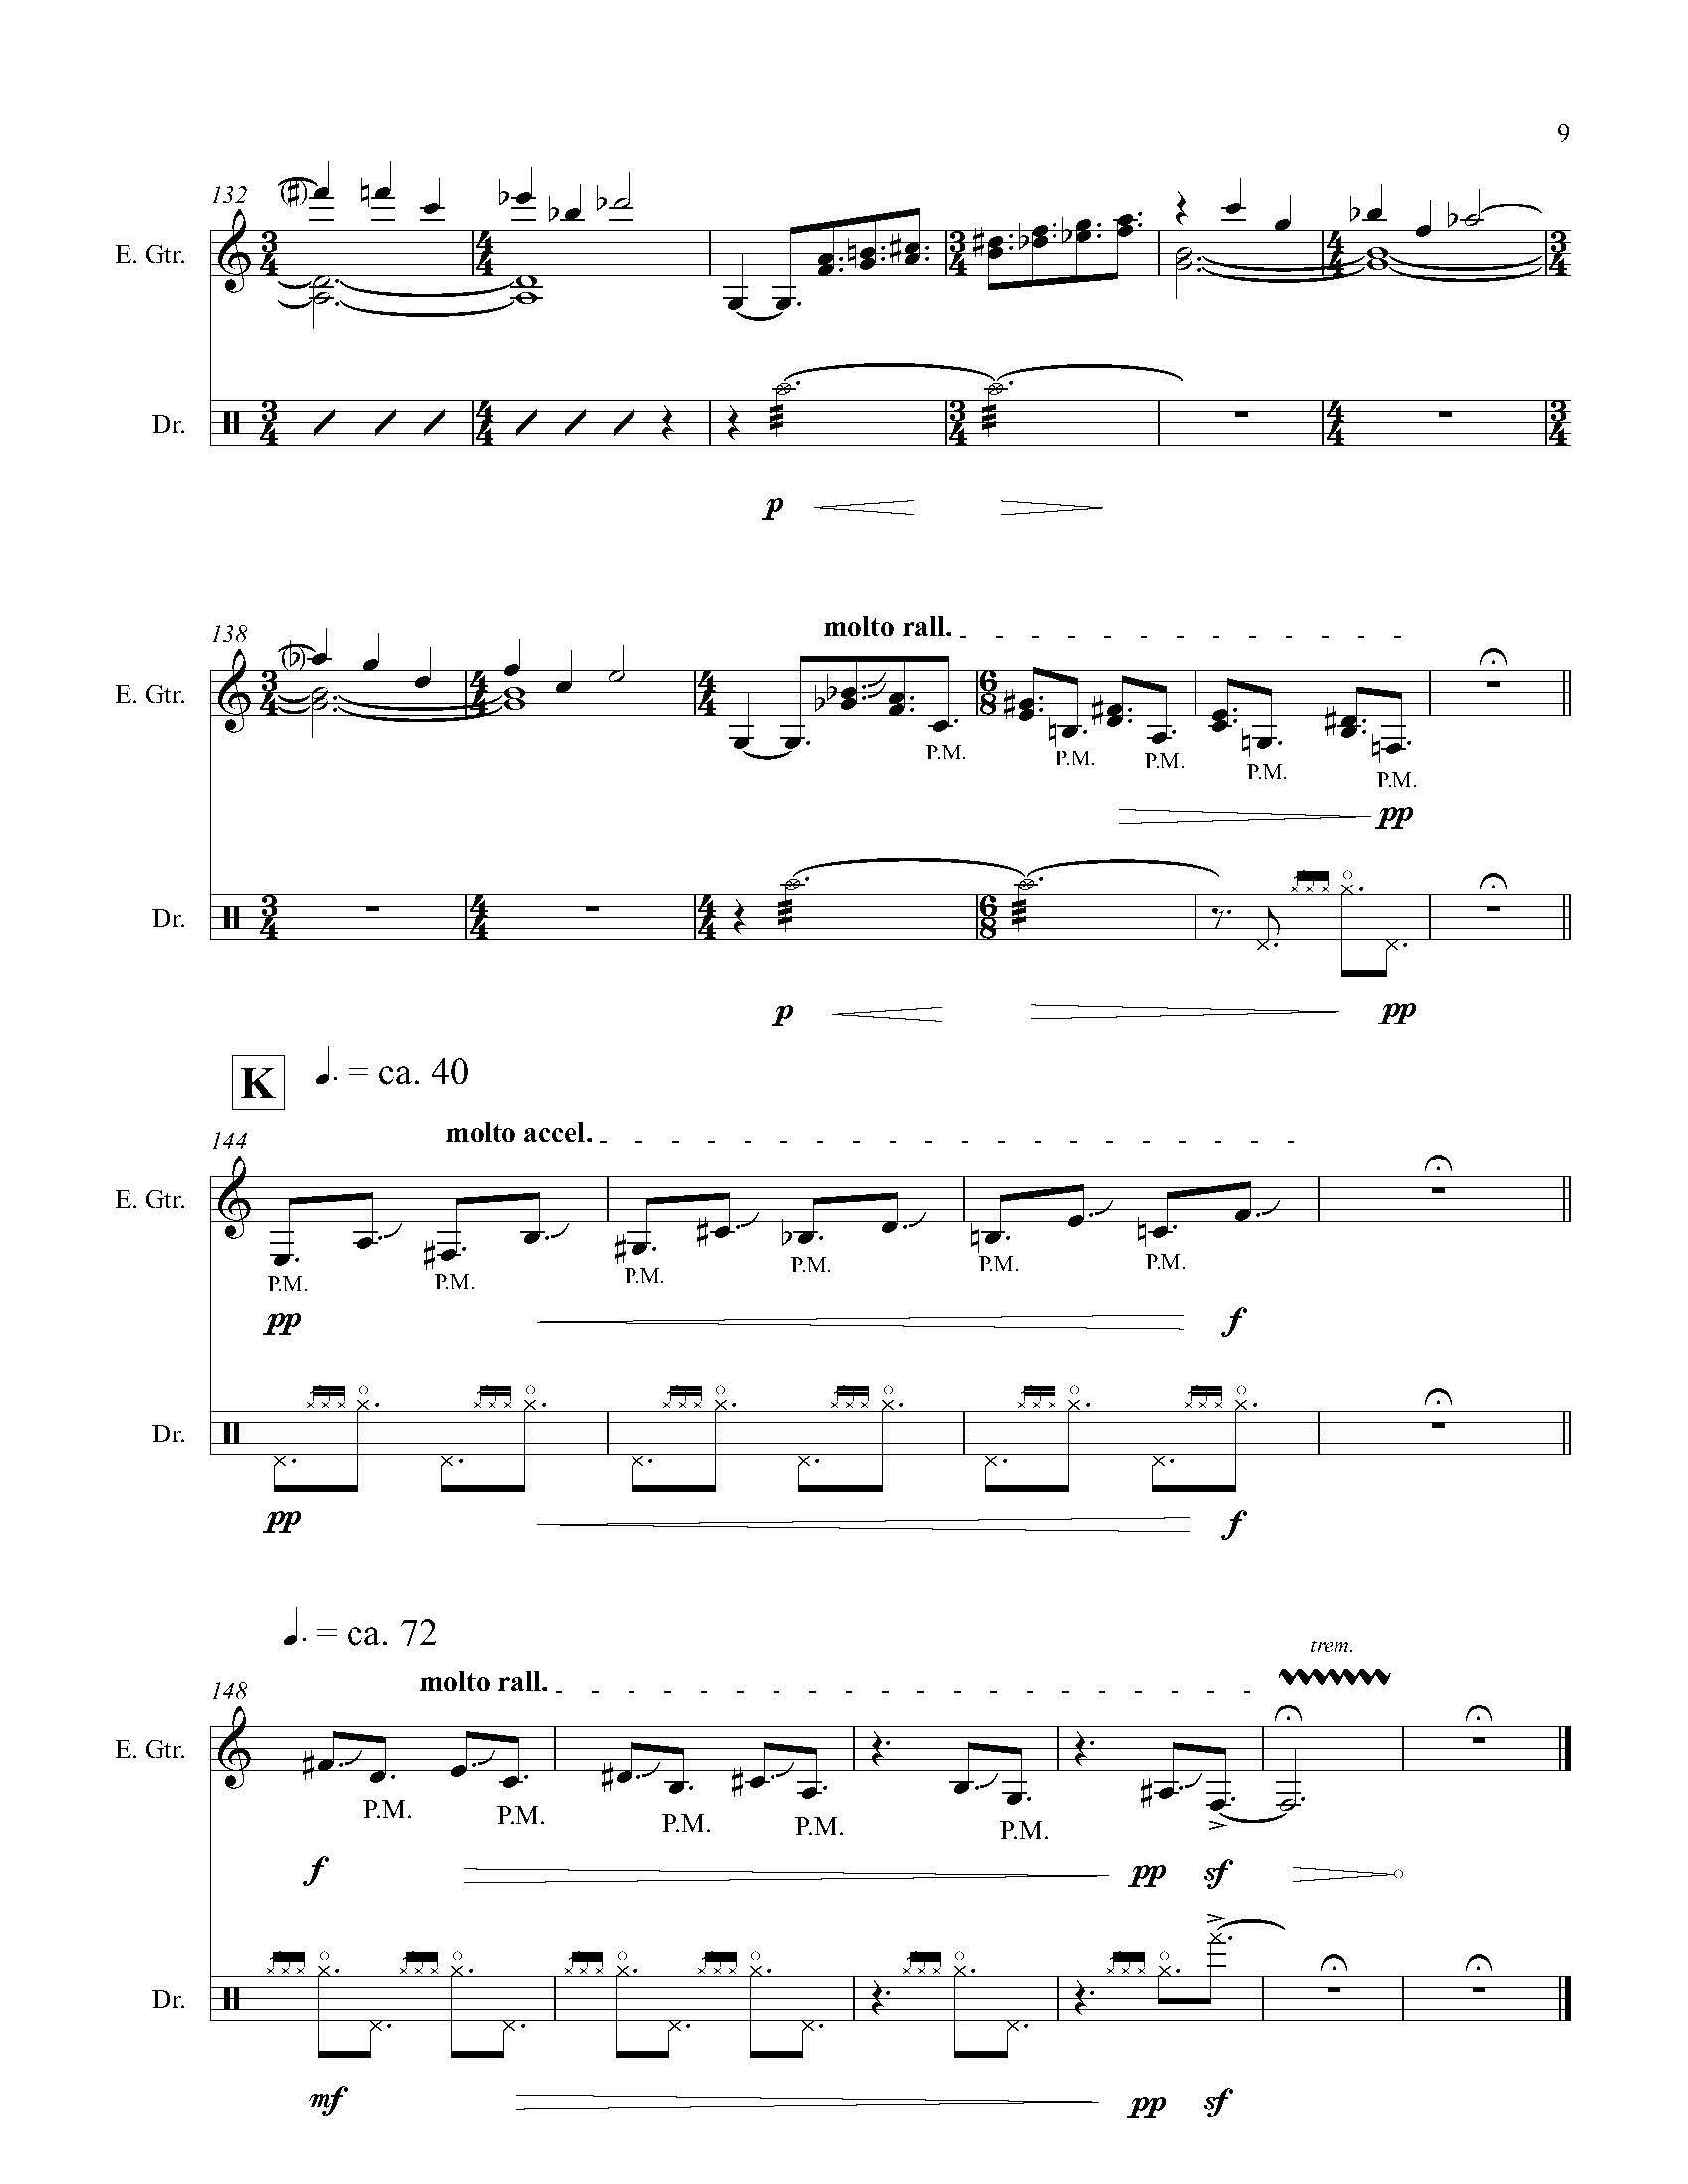 Atoms - Complete Score_Page_15.jpg